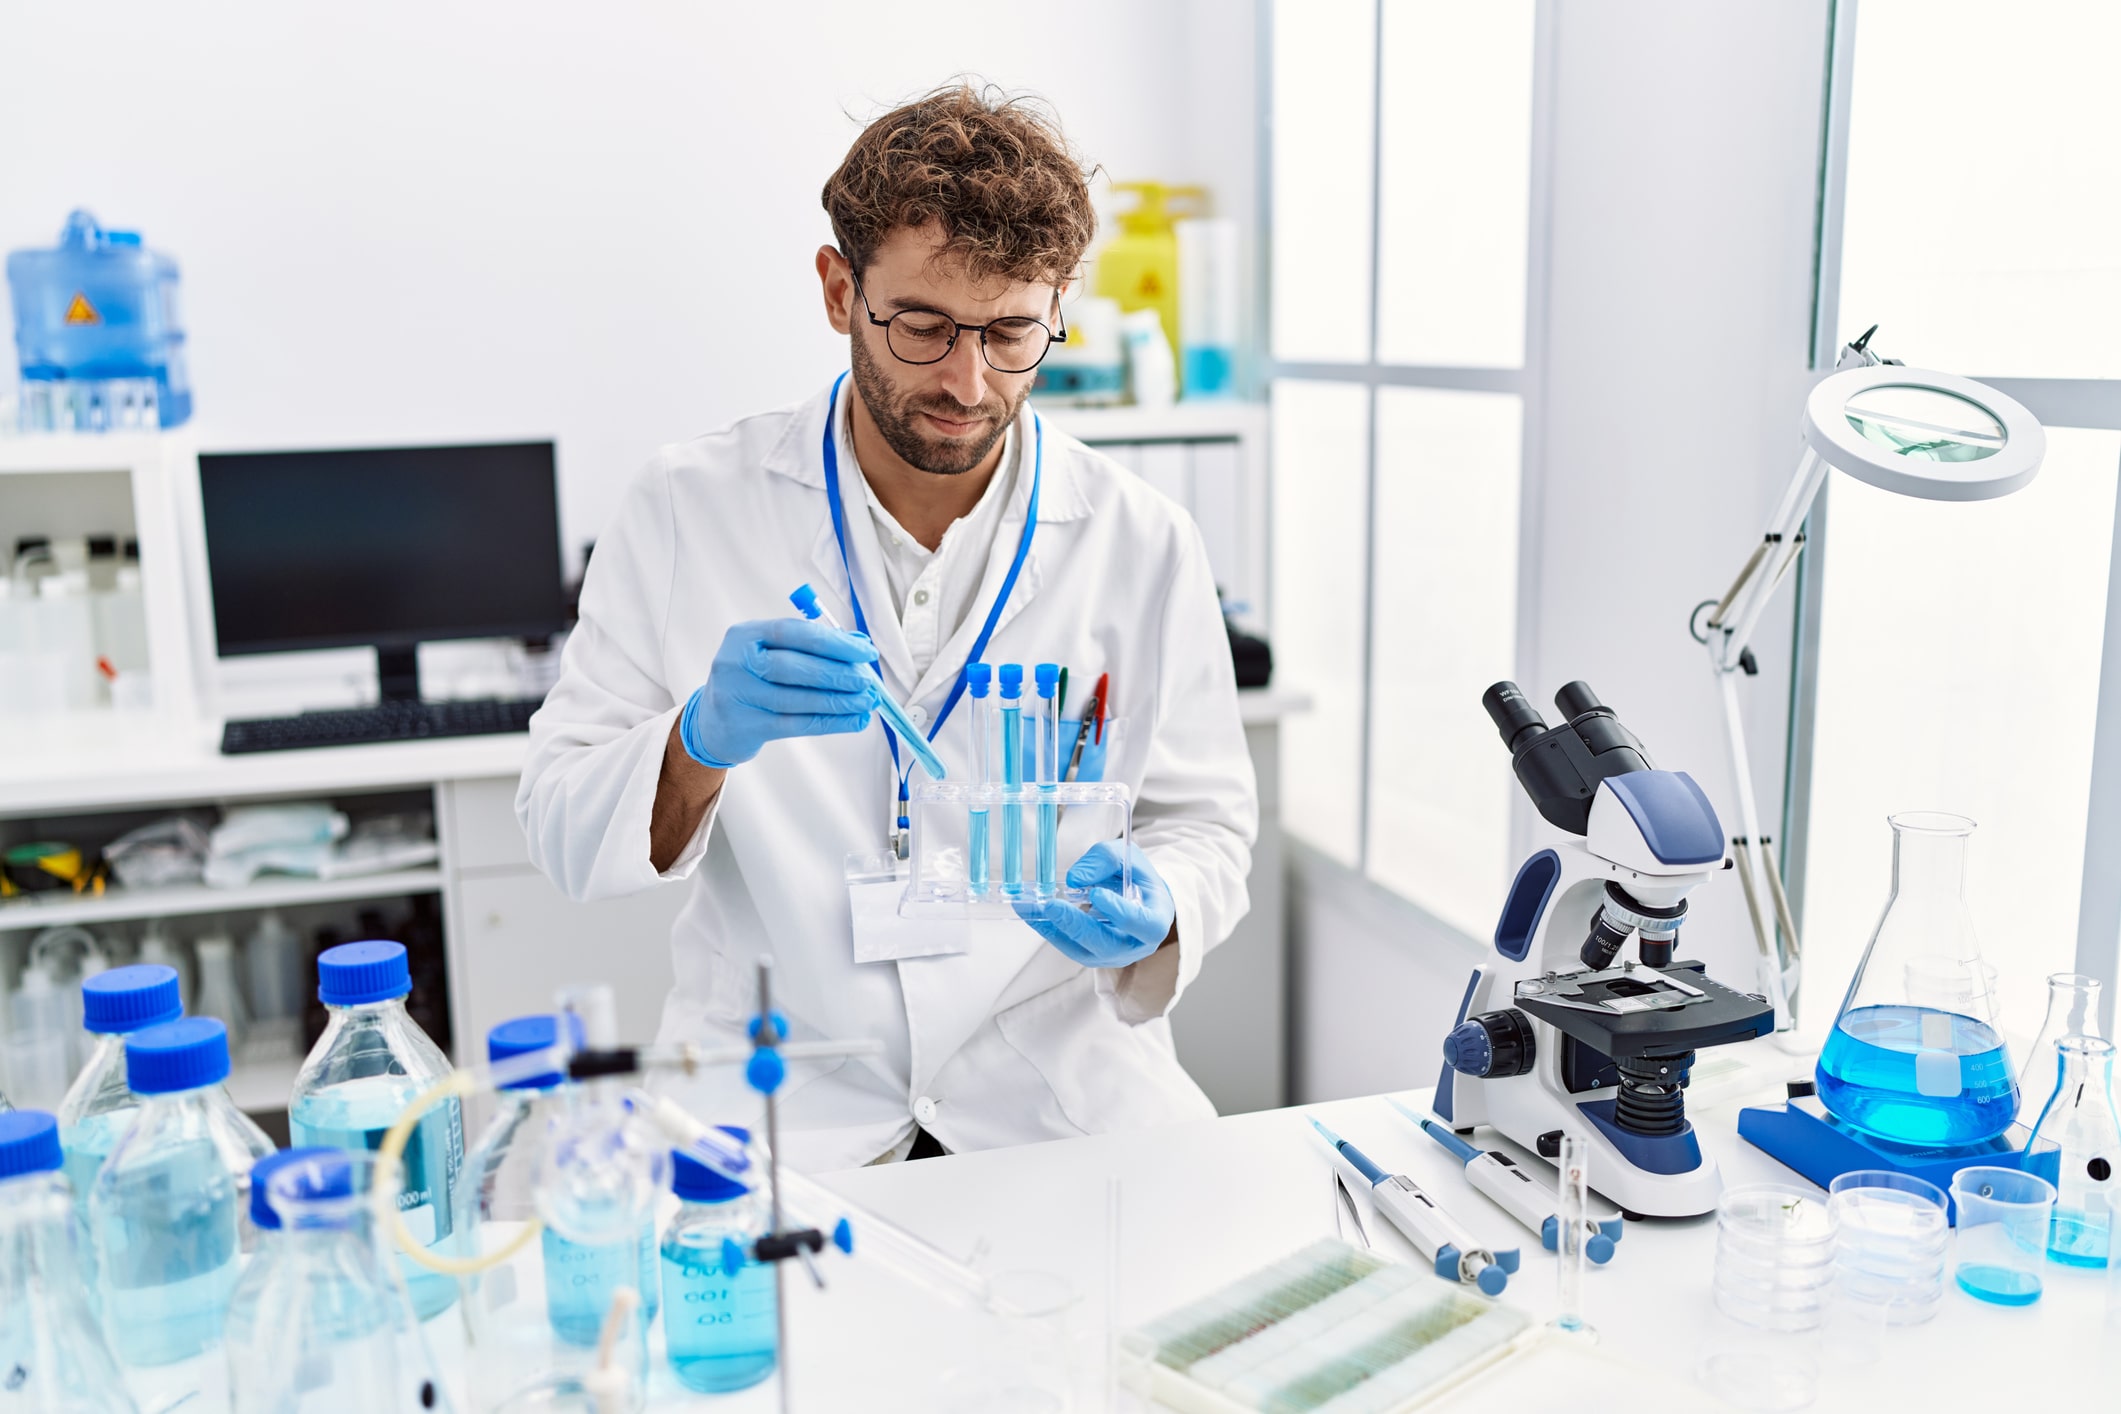 Male scientist working in a laboratory.